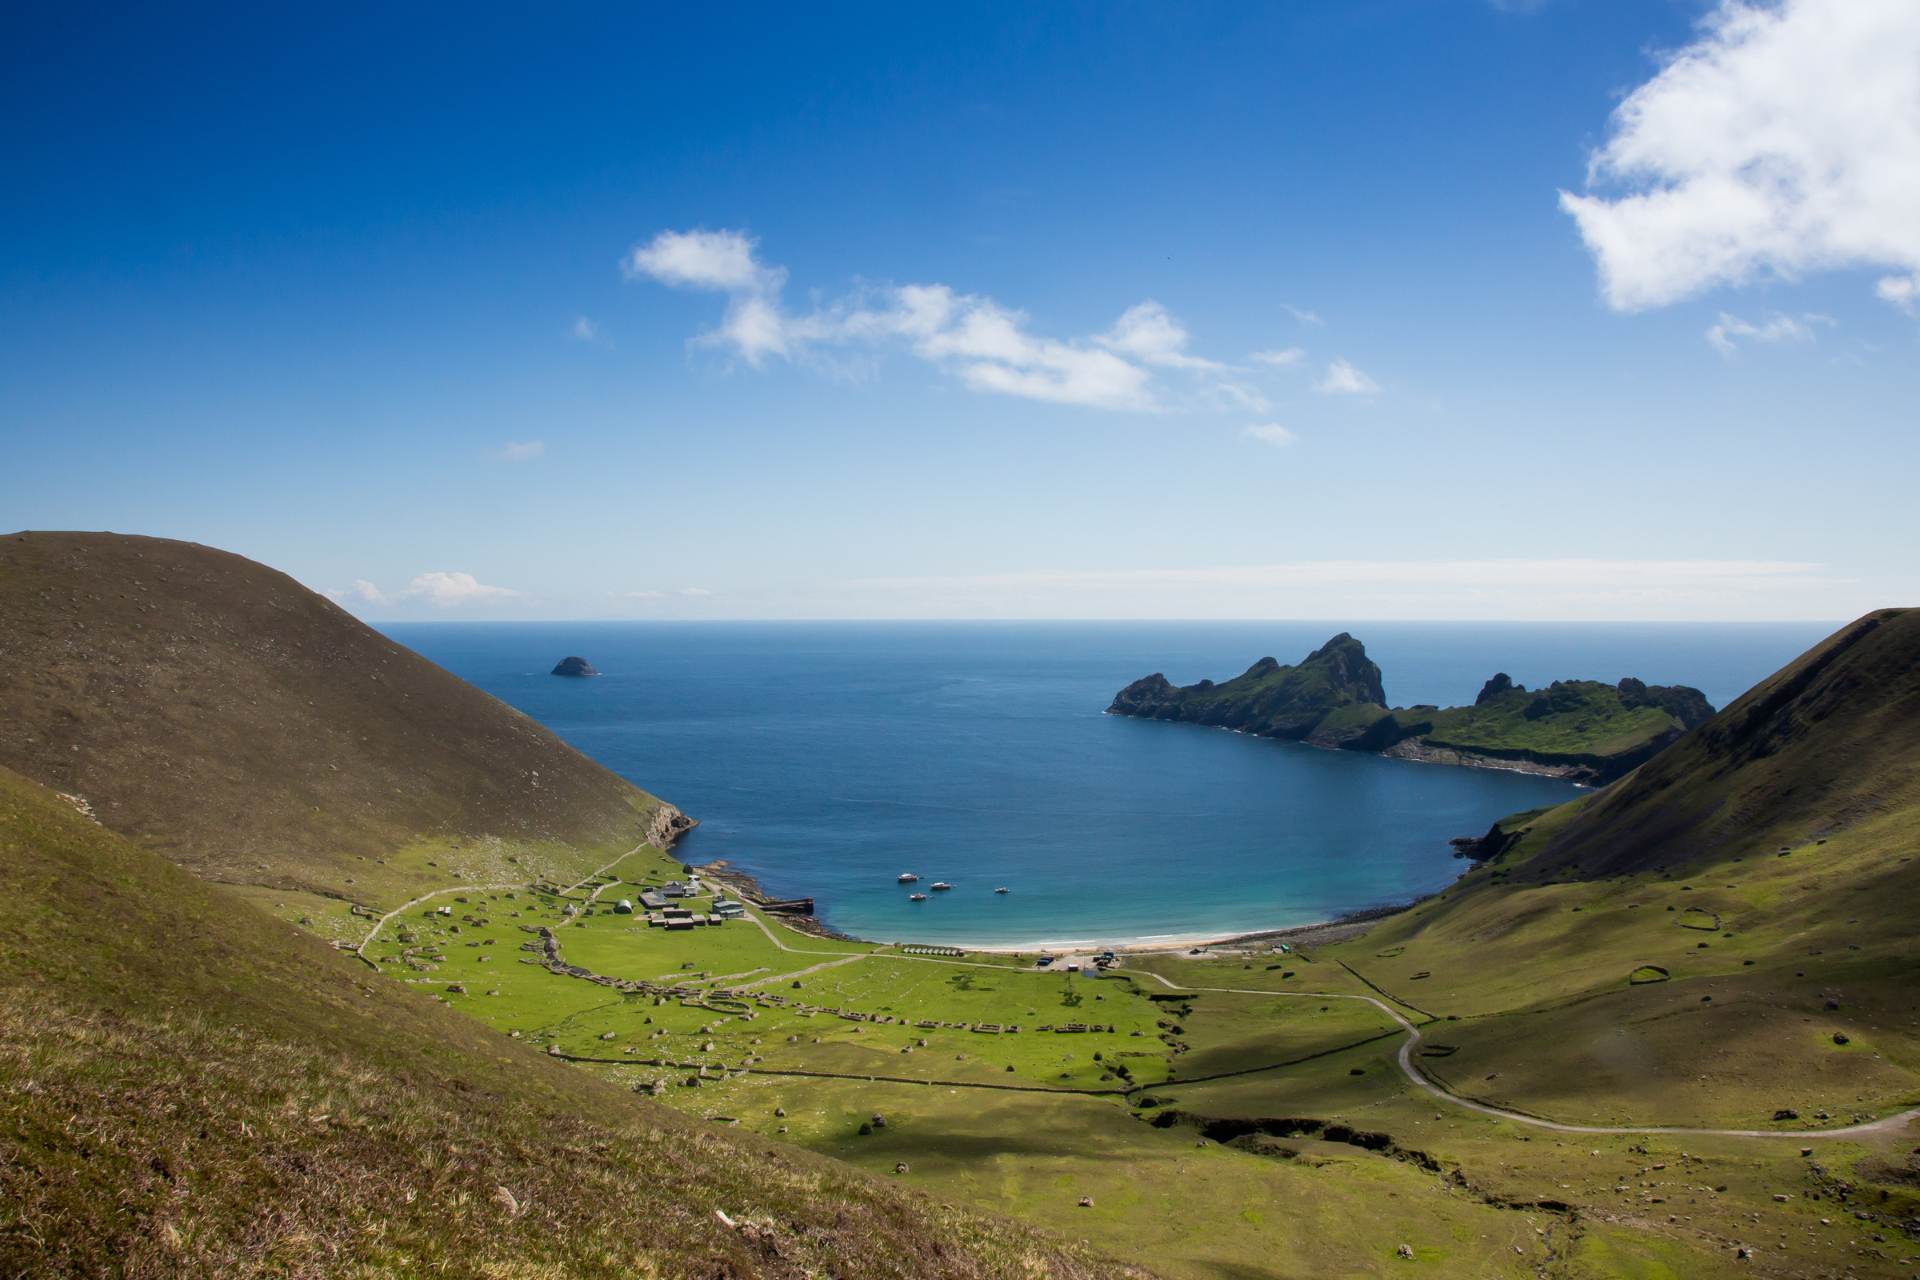 View from the top of Hirta island, St Kilda